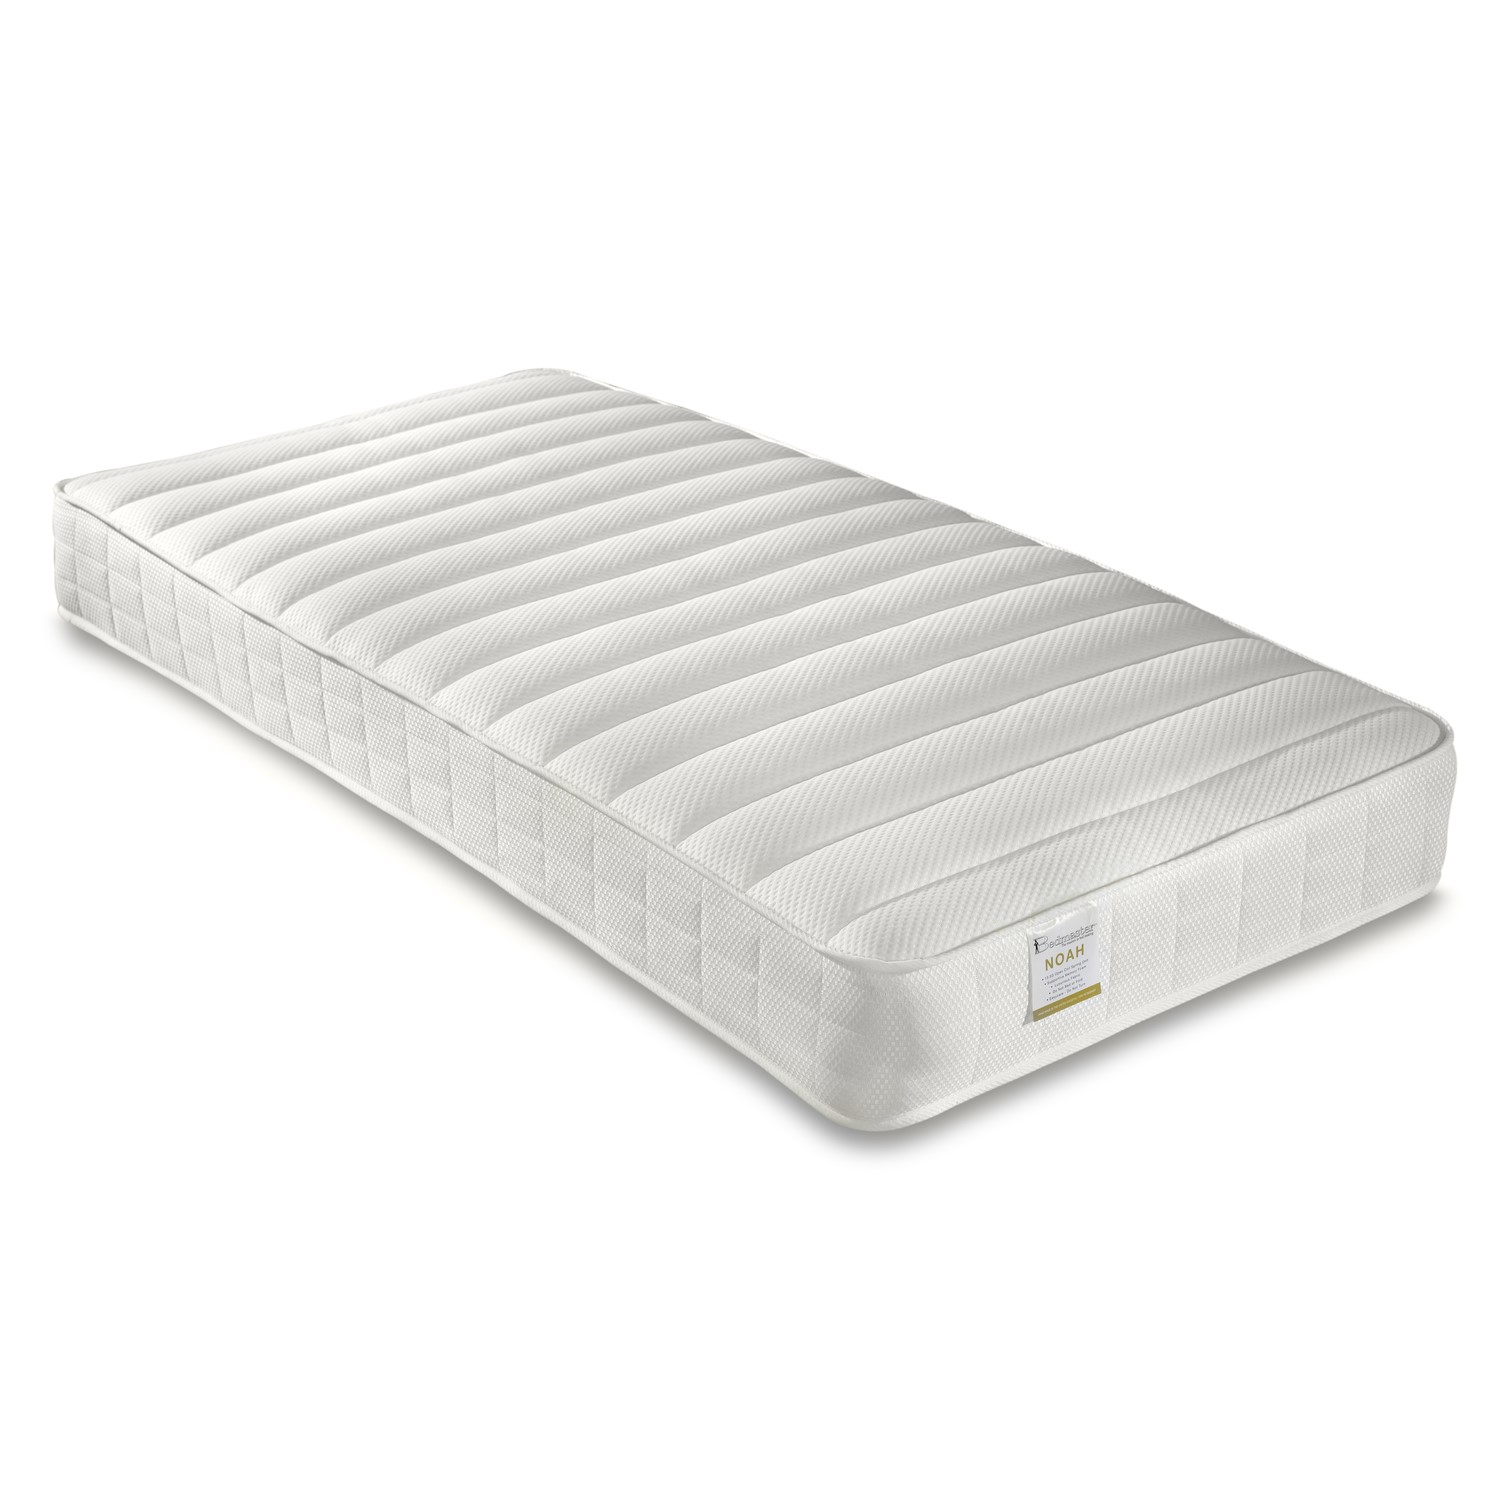 Read more about Small single memory foam top and open coil spring hybrid mattress noah